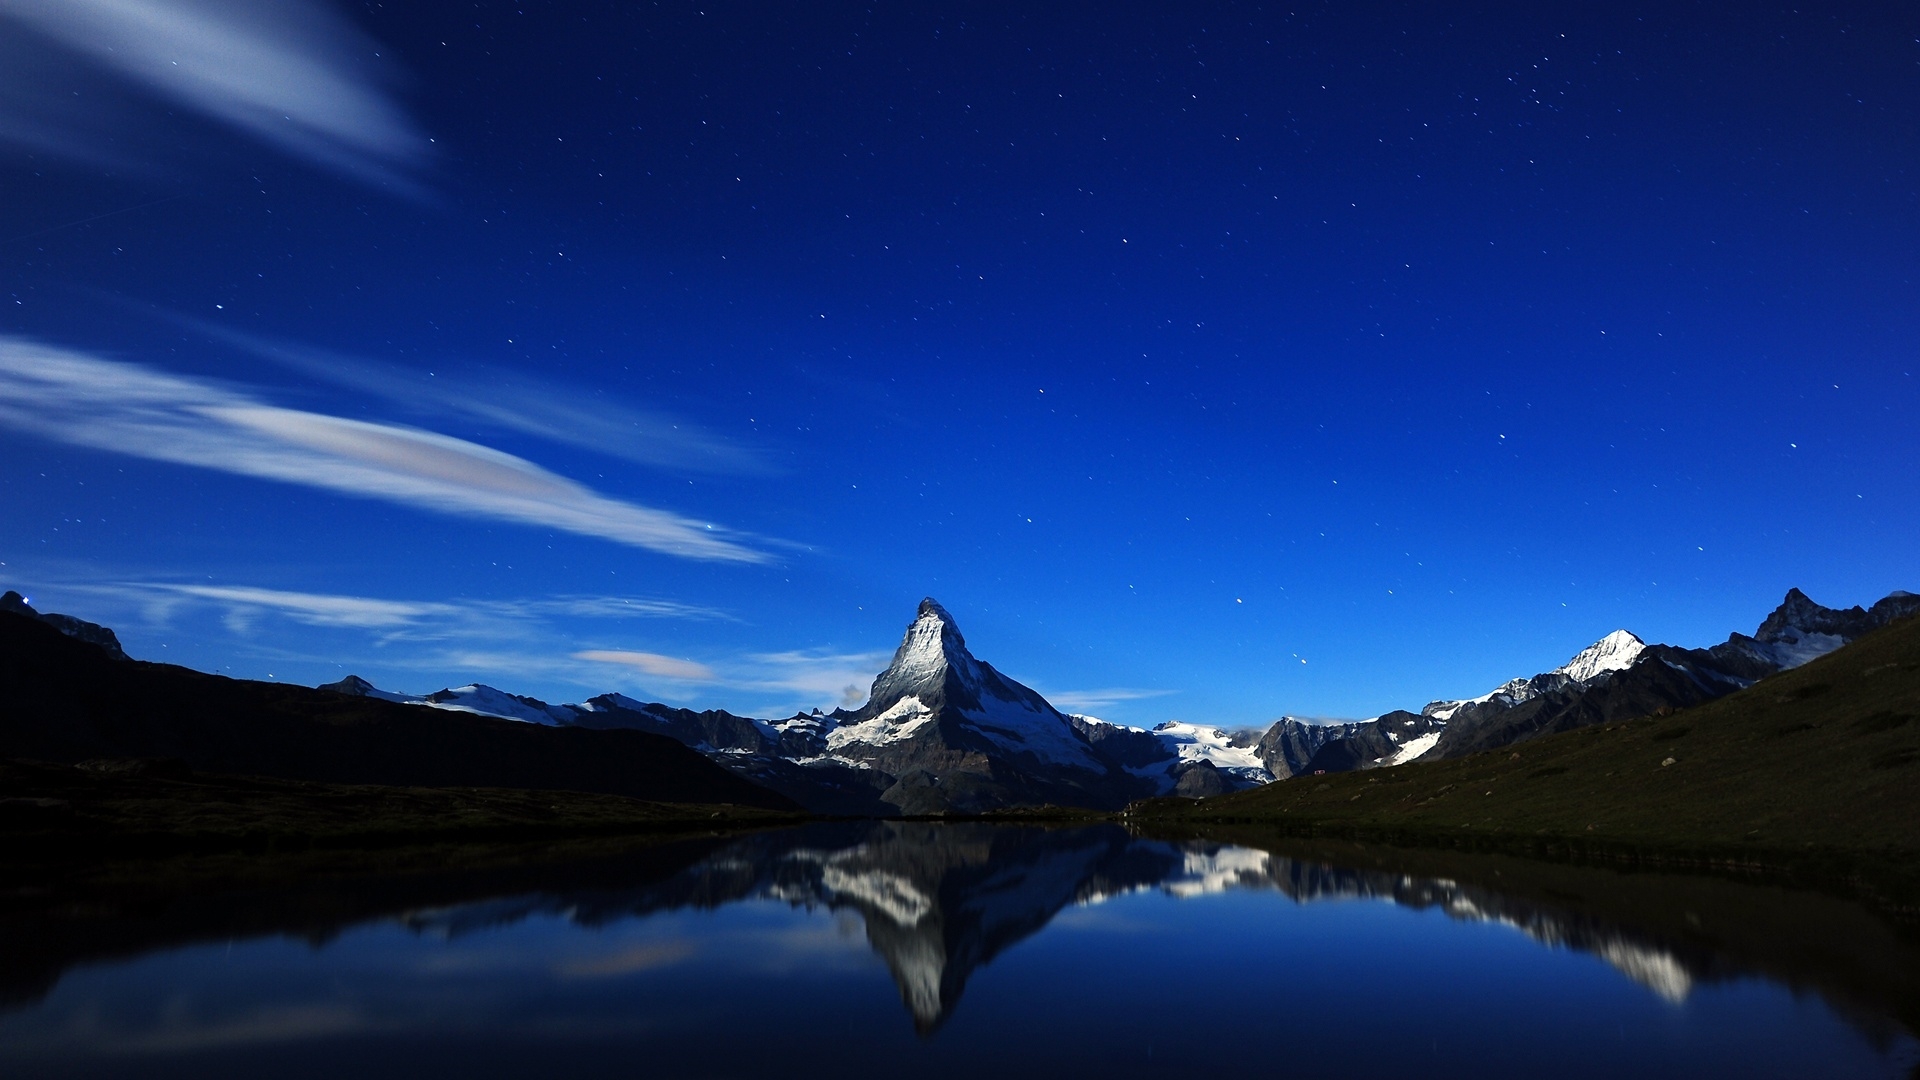 Mountain Reflections for 1920 x 1080 HDTV 1080p resolution